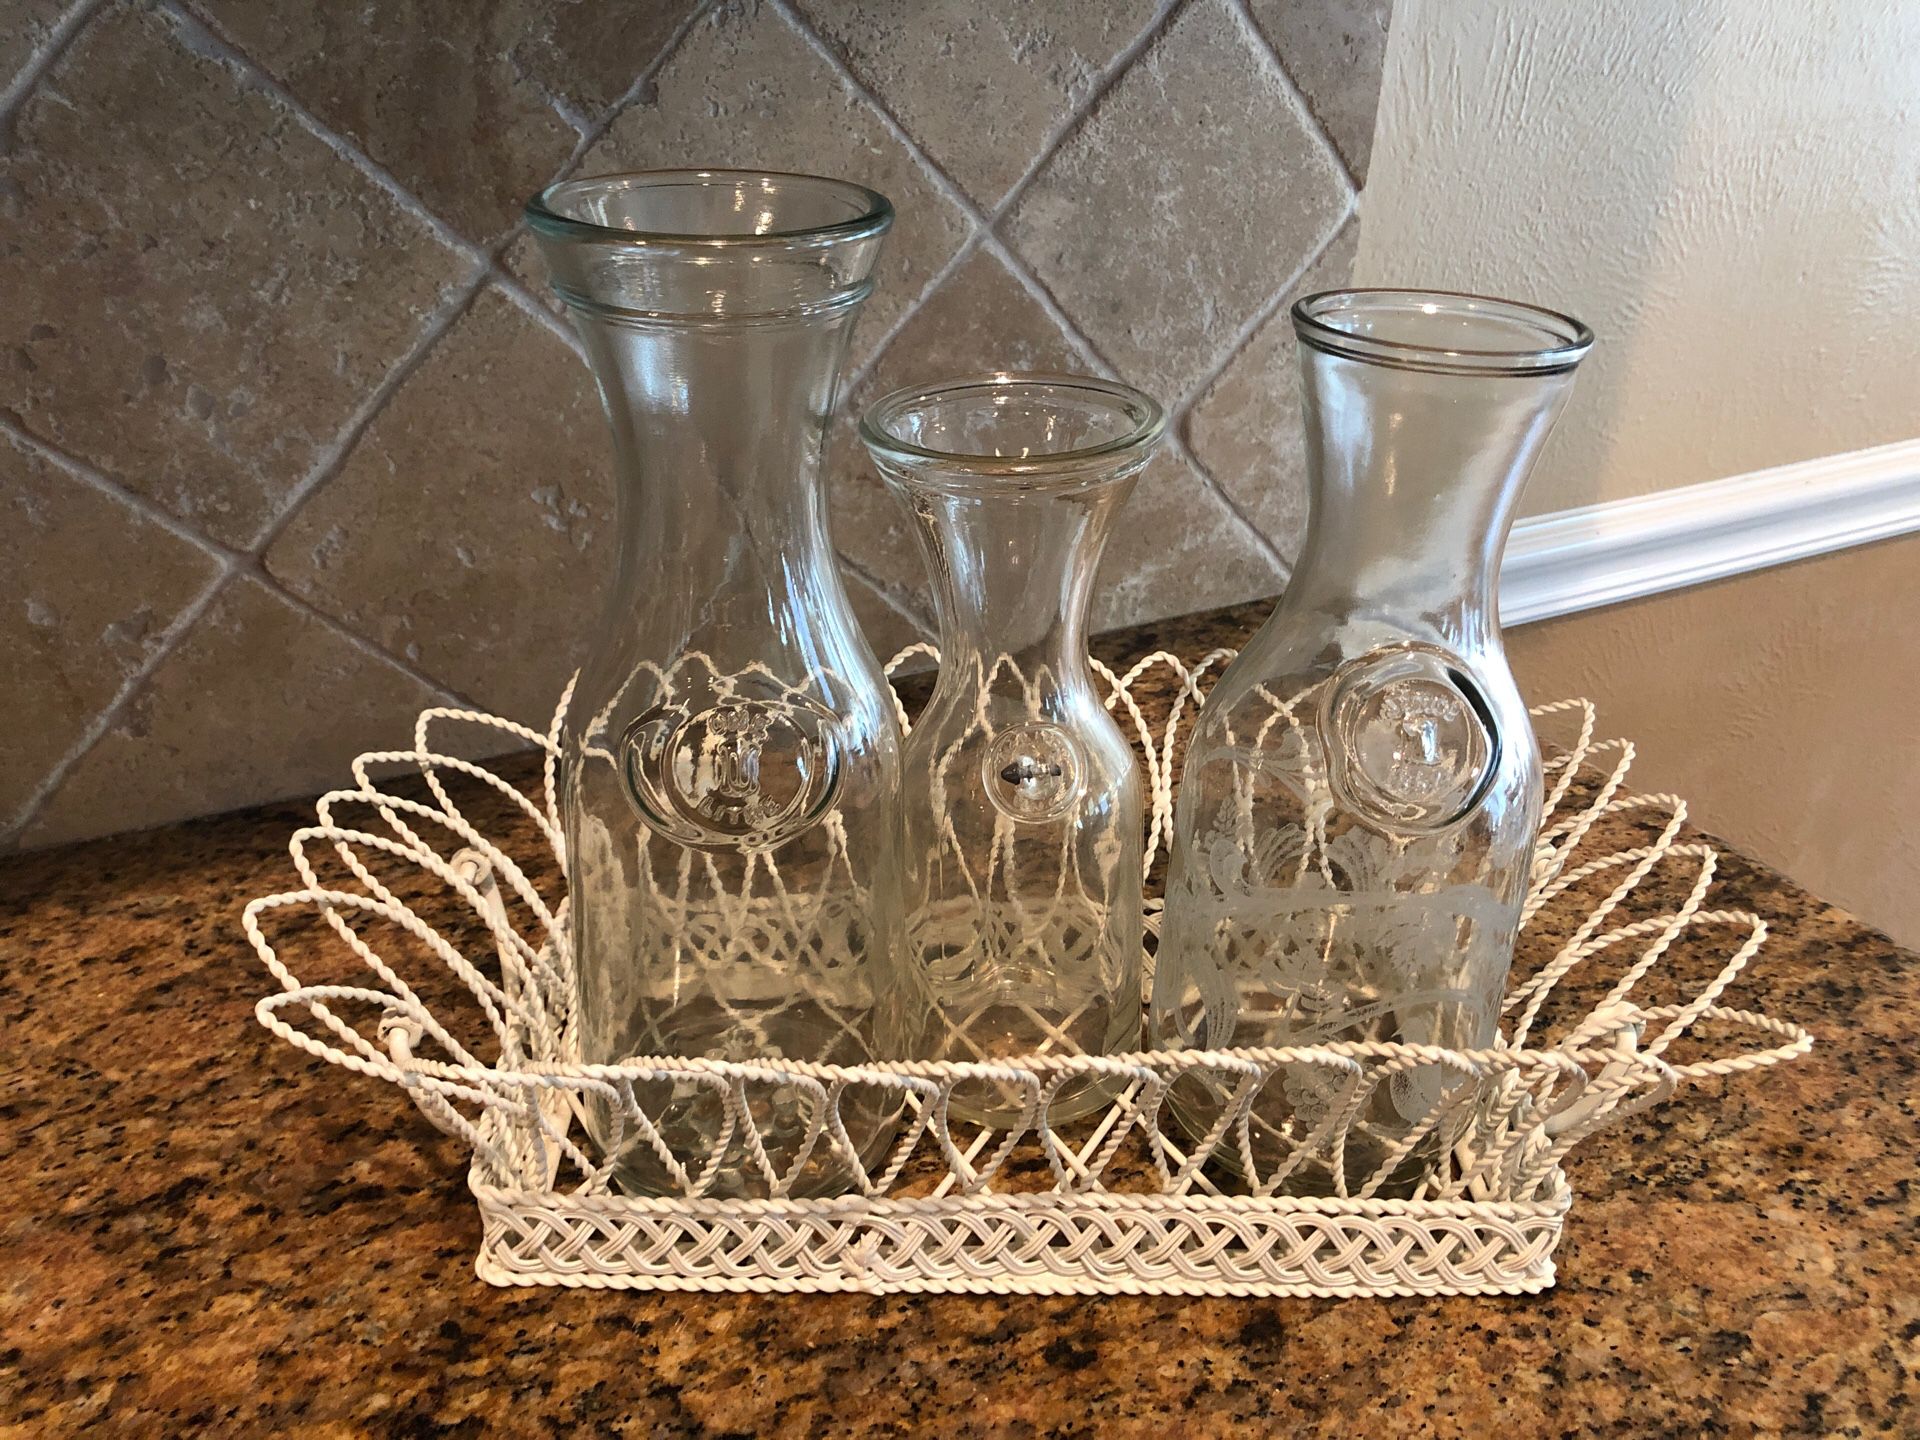 3 glass carafes in wire basket